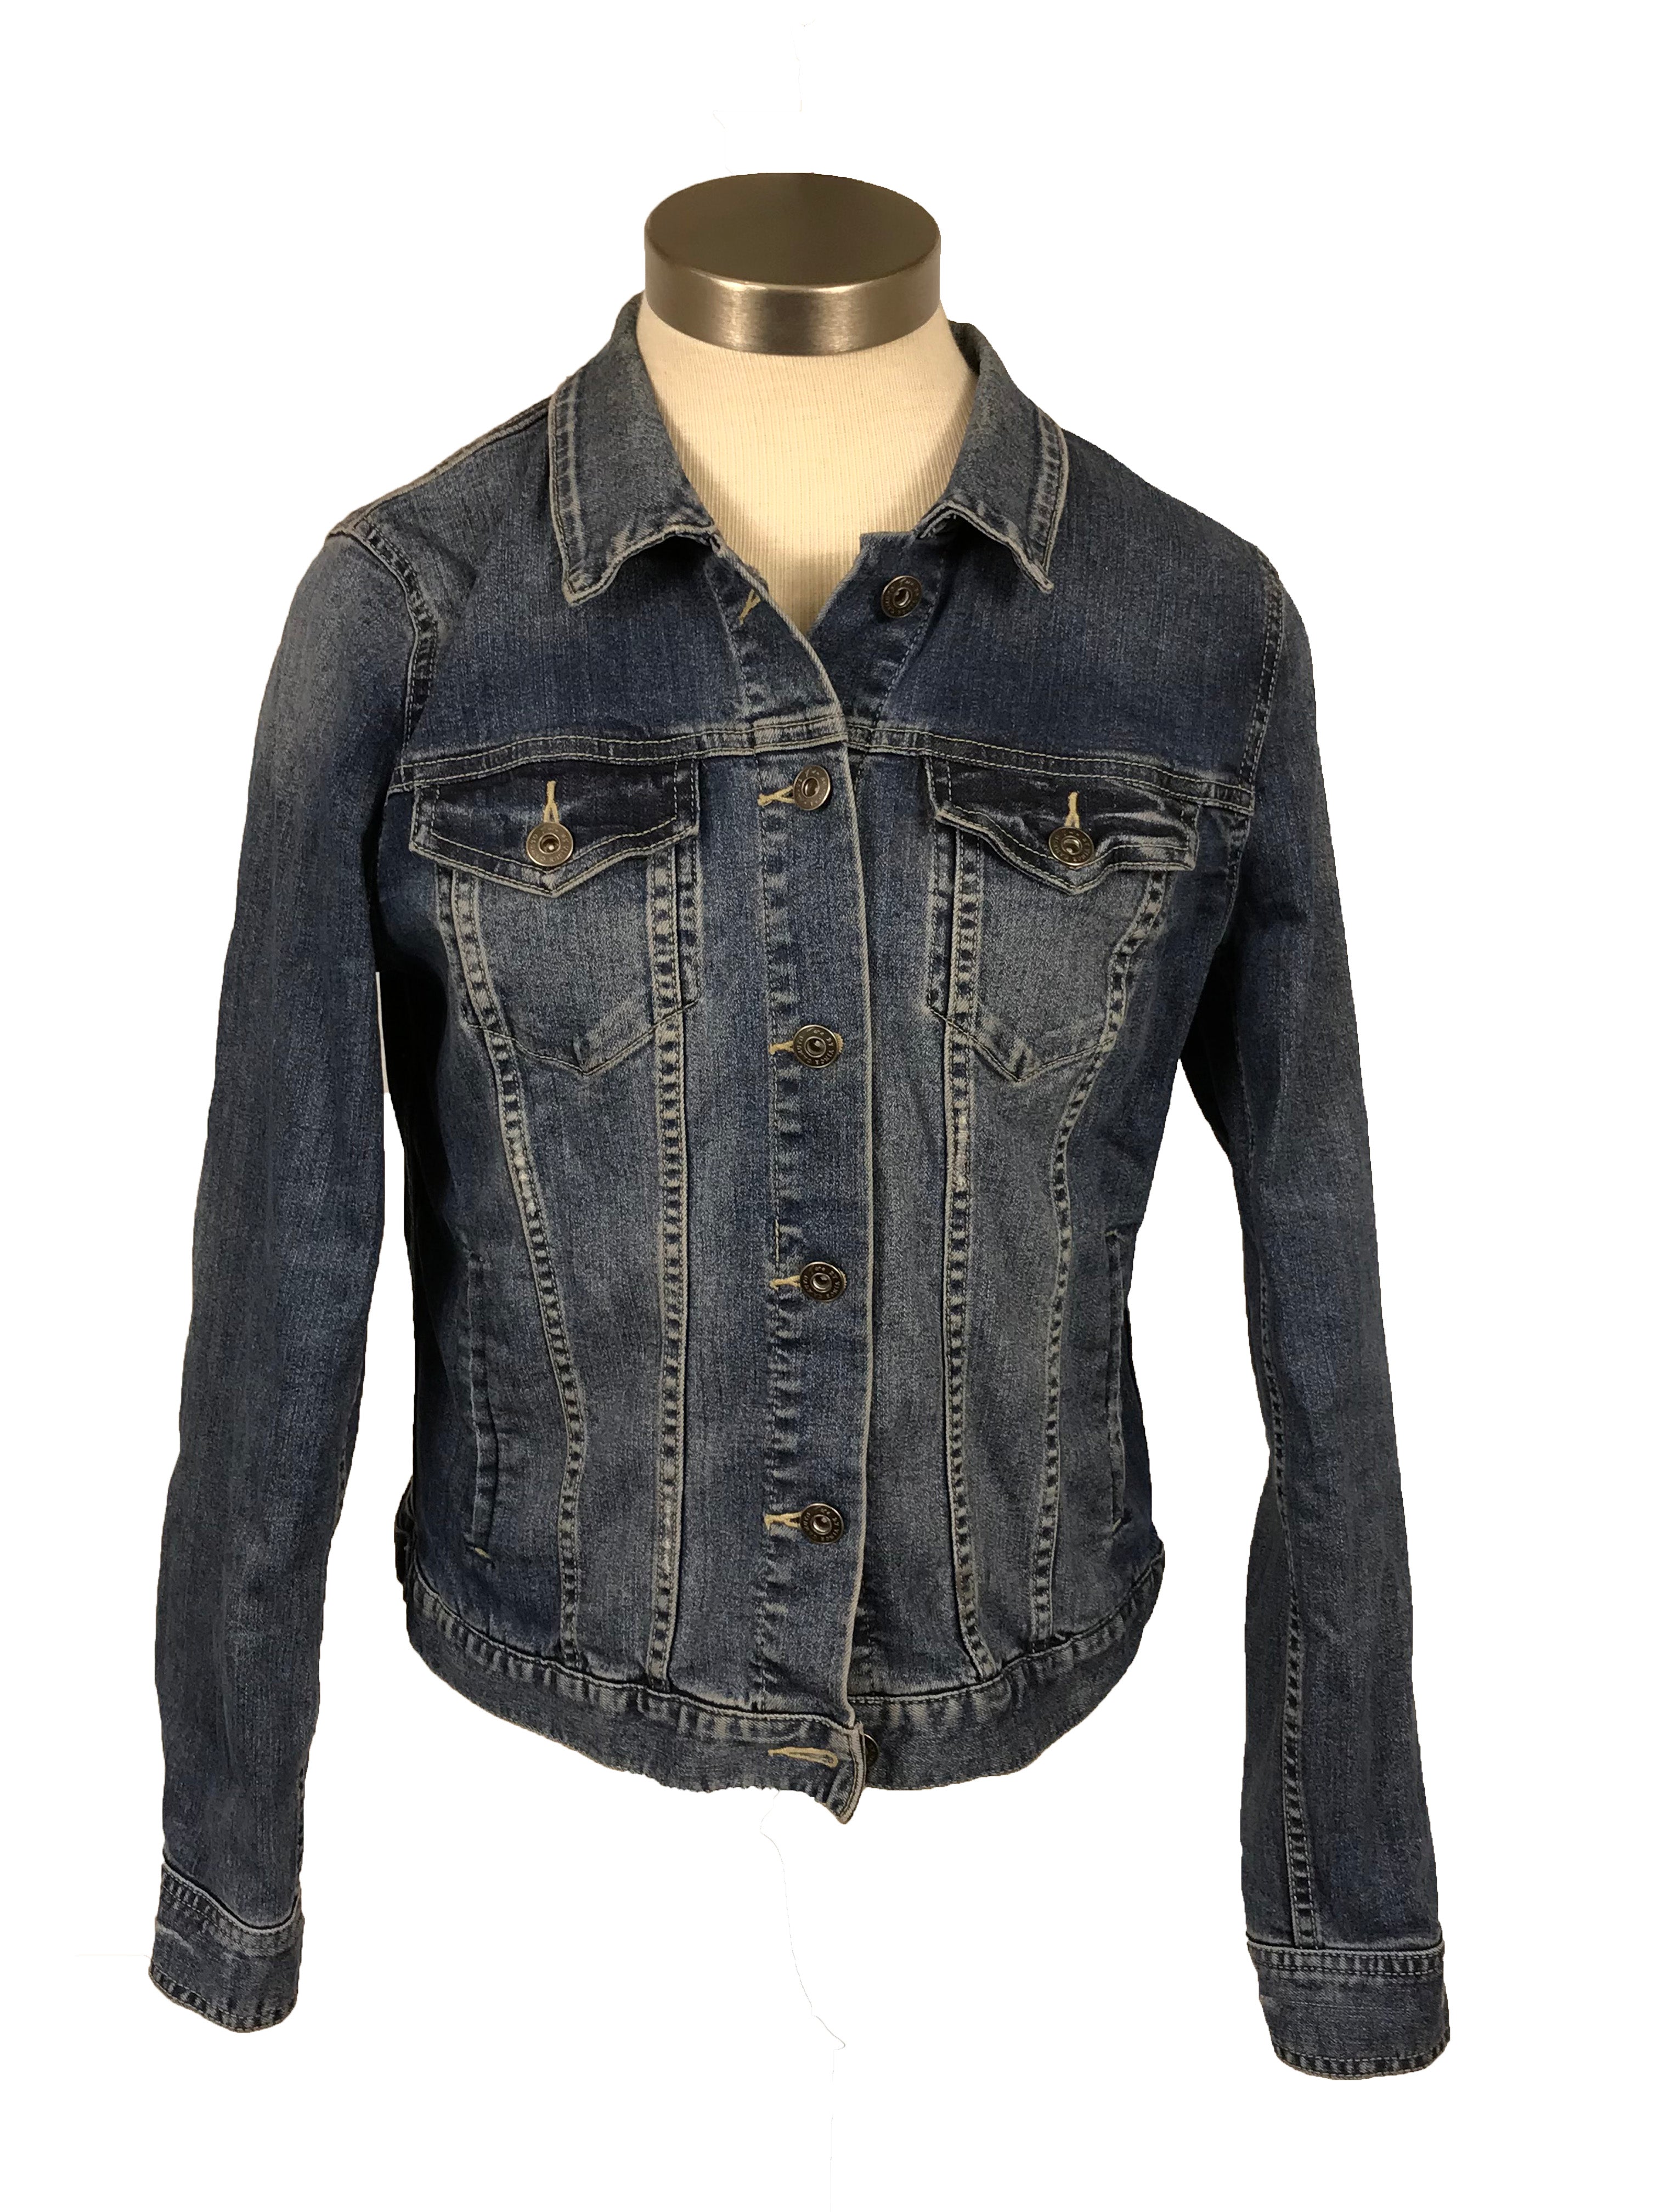 Two by Vince Camuto Denim Jacket Women's Size M